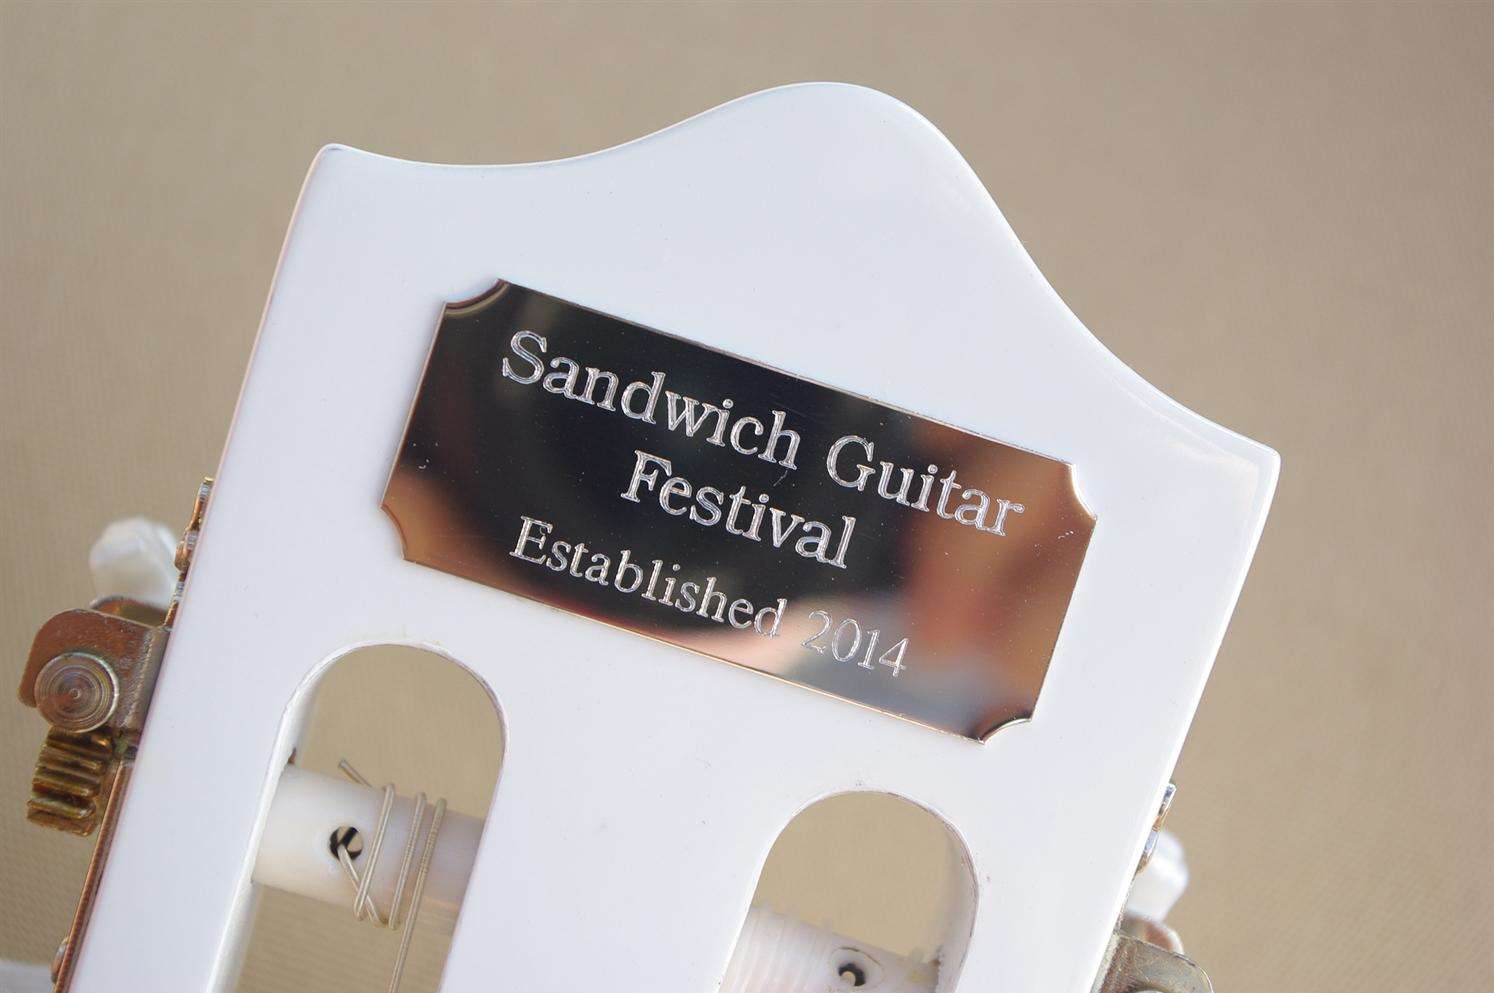 Guitarists and audiences can sign the guitar for a donation